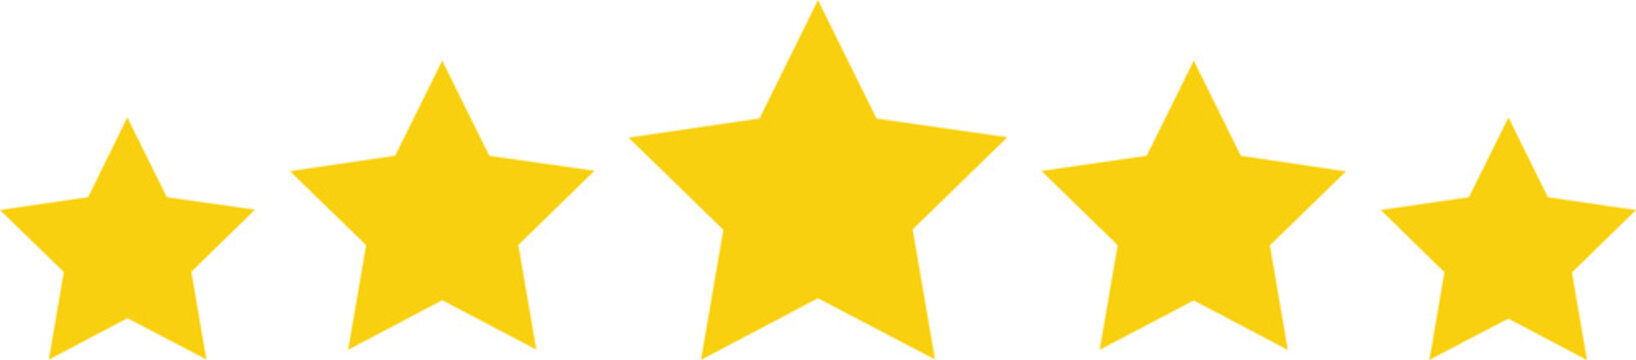 Five star flat icon review award